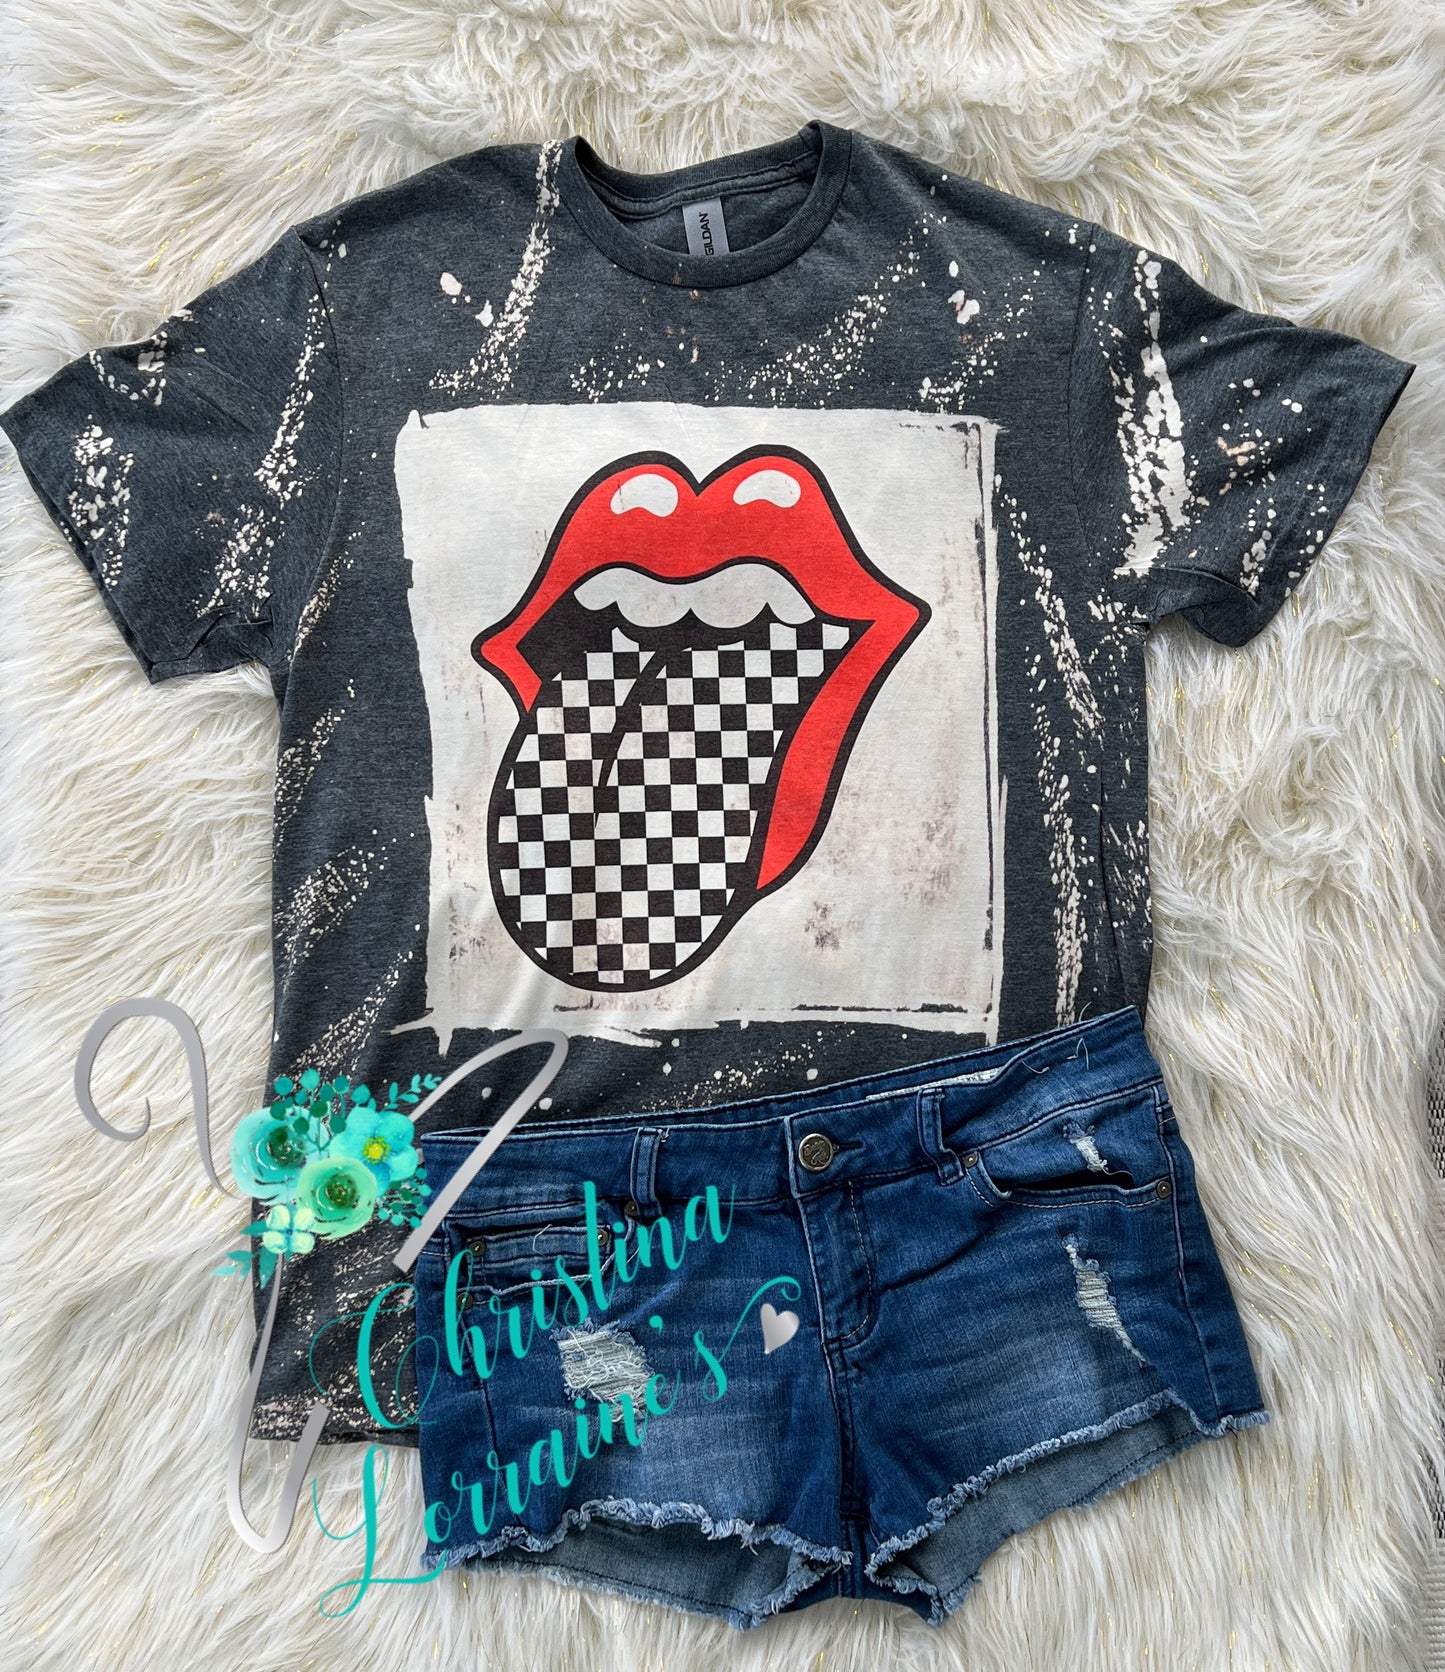 LOUD MOUTH Racing/Checkered Flag Tongue Hand Bleached Ladies/Women's T-Shirt